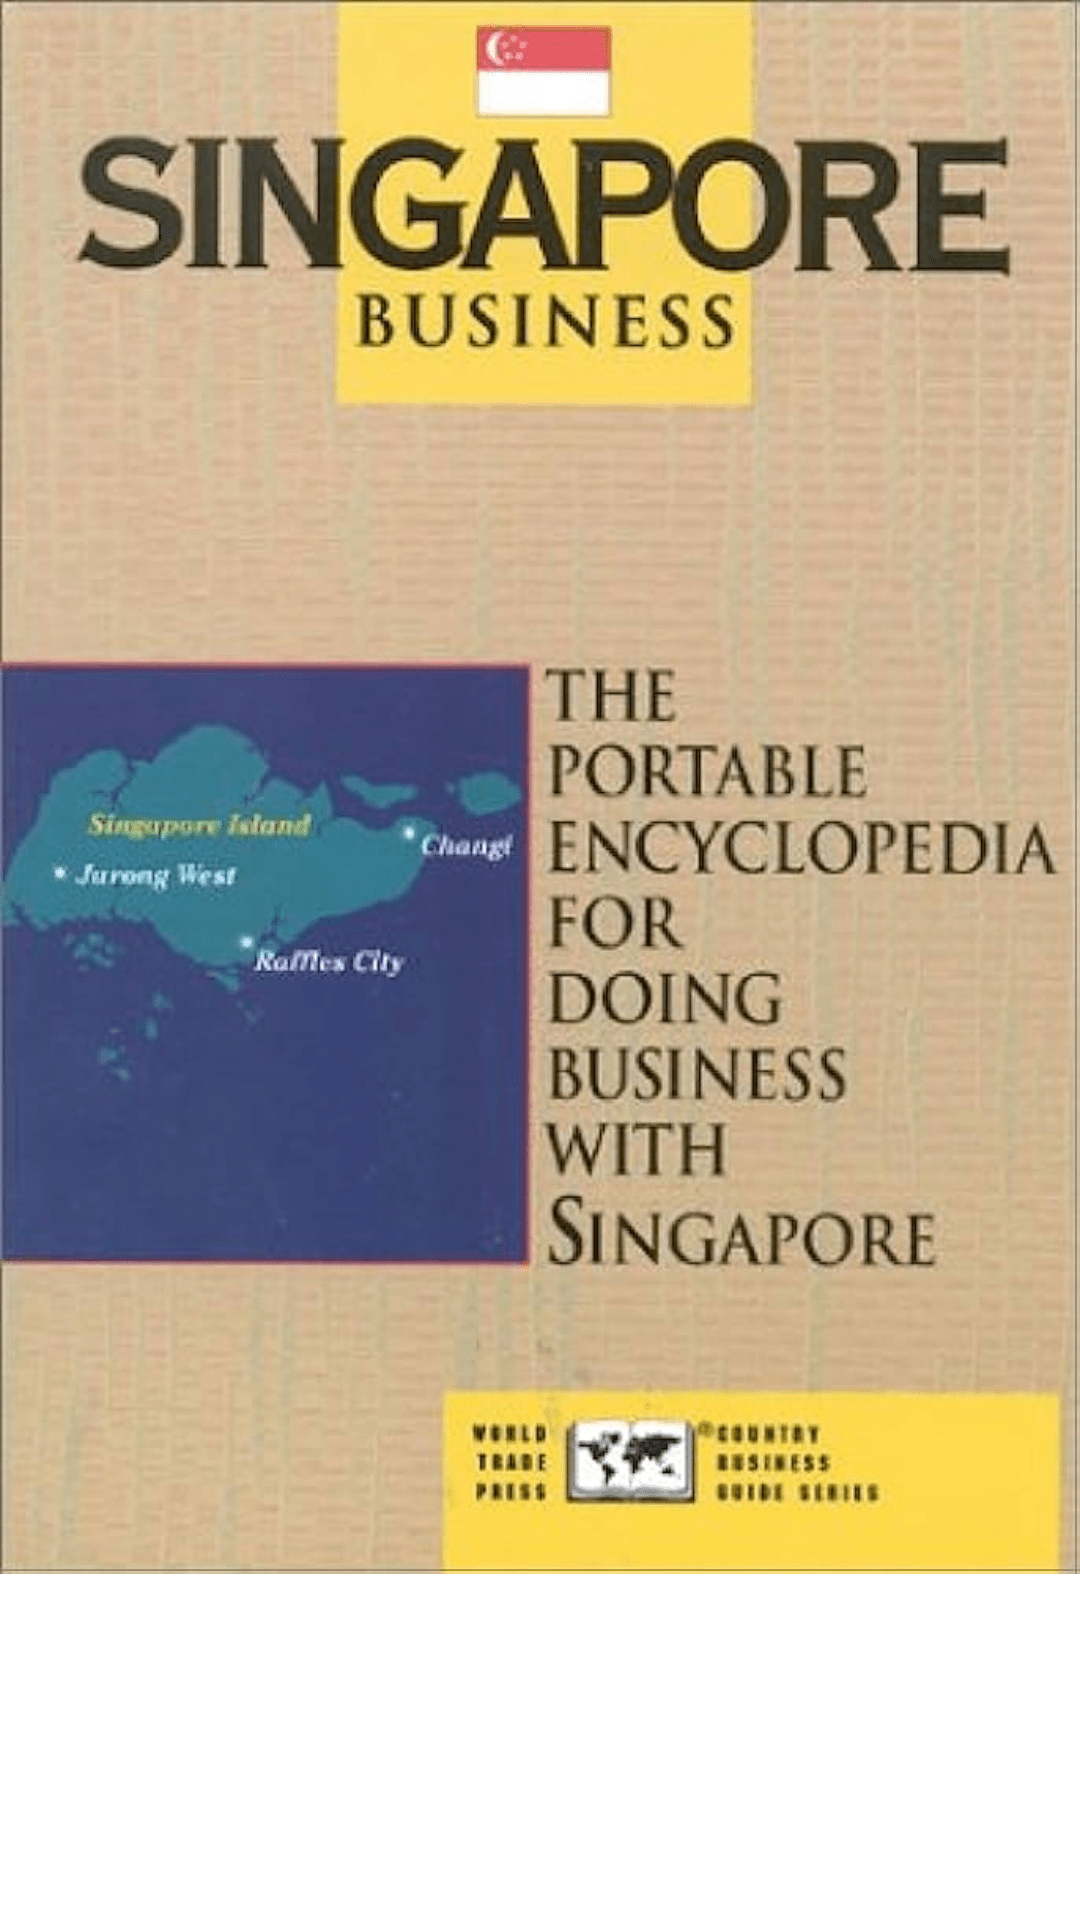 Singapore Business: The Portable Encyclopedia for Doing Business with Singapore